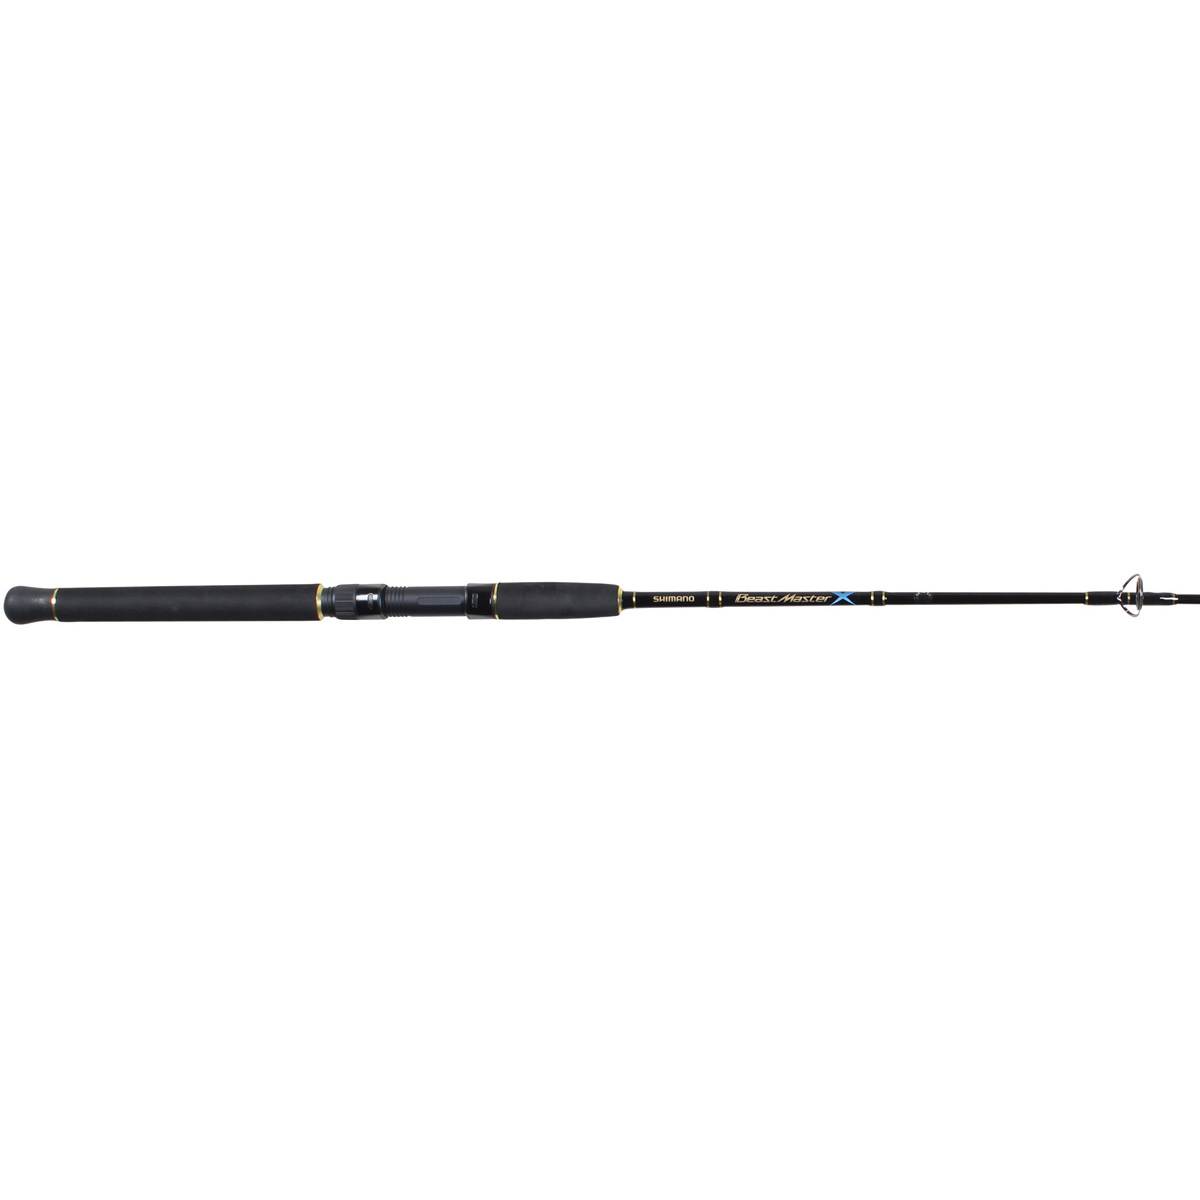 Shimano Beastmaster Overhead Rod 5ft 5 in 15-24 kg 1 Piece @ Club BCF